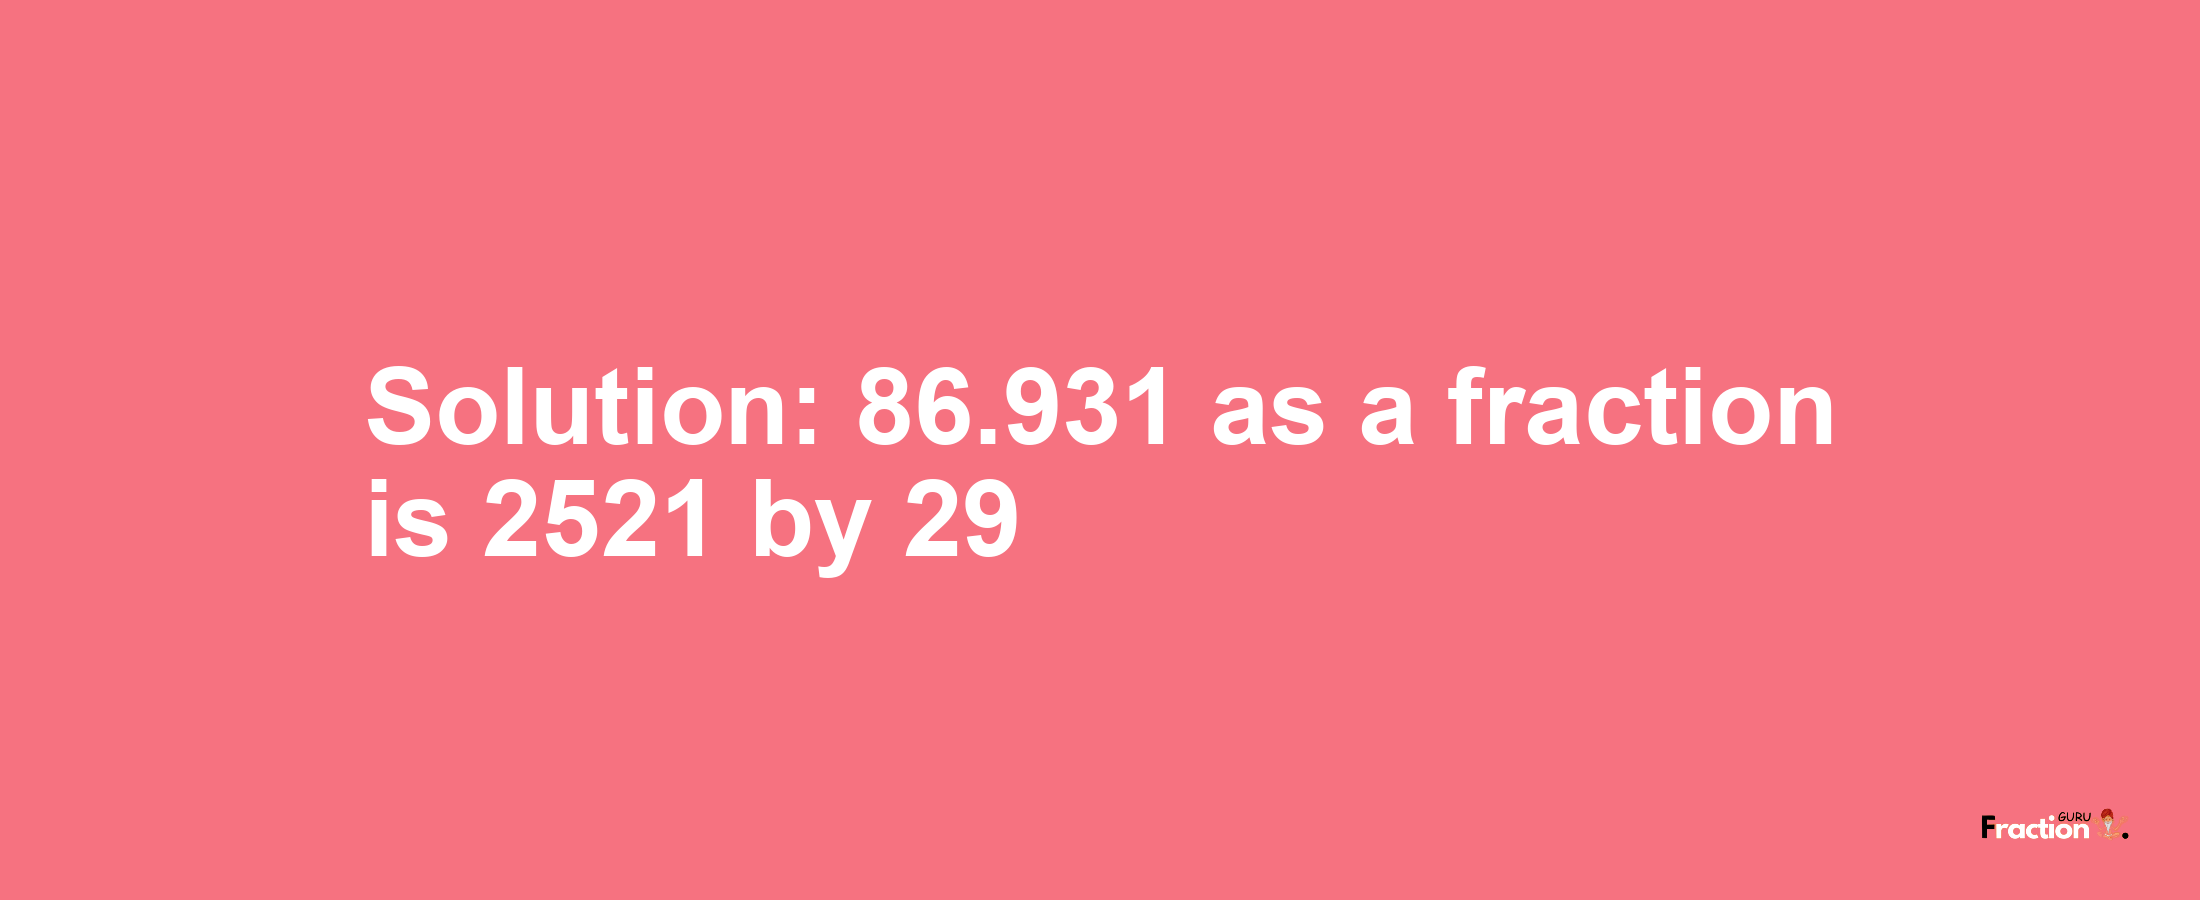 Solution:86.931 as a fraction is 2521/29